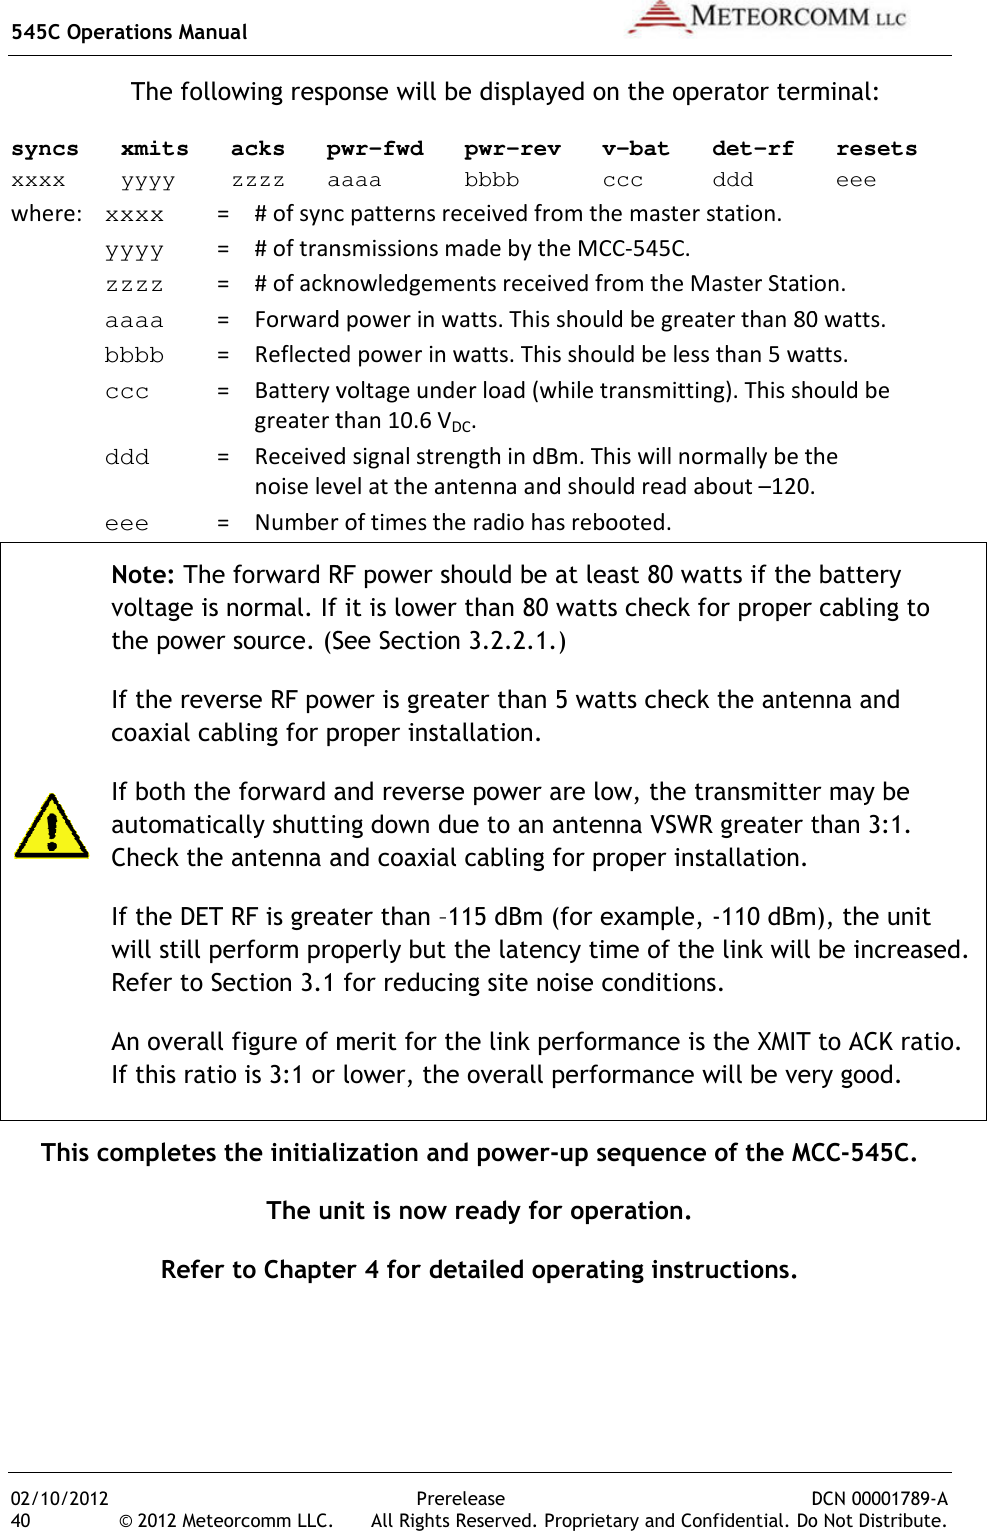 545C Operations Manual 02/10/2012 40 © 2012 Meteorcomm LLC. The following response will be displayed on the operator terminal:syncs   xmits   acks   pwrxxxx    yyyy    zzzz   aaaa      bbbb      ccc     ddd      eeewhere:  xxxx    = # of sync patterns received from the master station. yyyy    = # of transmissions made by the MCC zzzz    = # of acknowledgements received from the Master  aaaa     =  Forward power in watts bbbb     =  Reflected power in watts ccc        =  Battery voltage under load (while transmitting)       greater than 10.6  ddd    =  Received signal strength in noise level at the antenna and should read about  eee    =  Number of times the radio has rebooted. Note: The forward RF power should be at least 80 watts if the battery voltage is normal. If it is lower than 80 watts check for proper cabling to the power source. (See Section 3.2.2.1.)If the reverse RF power is greater than 5 watts check the antenna and coaxial cabling for proper installation.If both the forward and reverse powautomatically shutting down due to an antenna VSWR greater than 3:1. Check the antenna and coaxial cabling for proper installation.If the DET RF is greater than will still perform properly but the latency time of the link will be increased. Refer to Section 3.1 for reducing site noise conditions.An overall figure of merit for the link performance is the XMIT to ACK ratio. If this ratio is 3:1 or lower, the overall performance wiThis completes the initialization and powerThe unit is now ready for operation.Refer to Chapter 4 for detailed operating instructions.   Prerelease DCN .  All Rights Reserved. Proprietary and Confidential. DoThe following response will be displayed on the operator terminal:syncs   xmits   acks   pwr-fwd   pwr-rev   v-bat   det-rf   resetsxxxx    yyyy    zzzz   aaaa      bbbb      ccc     ddd      eee# of sync patterns received from the master station. # of transmissions made by the MCC-545C. # of acknowledgements received from the Master Station.Forward power in watts. This should be greater than 80 watts.Reflected power in watts. This should be less than 5 watts.Battery voltage under load (while transmitting). This should be greater than 10.6 VDC. Received signal strength in dBm. This will normally be thenoise level at the antenna and should read about –120.Number of times the radio has rebooted. The forward RF power should be at least 80 watts if the battery is normal. If it is lower than 80 watts check for proper cabling to the power source. (See Section 3.2.2.1.) If the reverse RF power is greater than 5 watts check the antenna and coaxial cabling for proper installation. If both the forward and reverse power are low, the transmitter may be automatically shutting down due to an antenna VSWR greater than 3:1. Check the antenna and coaxial cabling for proper installation. If the DET RF is greater than –115 dBm (for example, -110 dBm), the unit rm properly but the latency time of the link will be increased. Refer to Section 3.1 for reducing site noise conditions. An overall figure of merit for the link performance is the XMIT to ACK ratio. If this ratio is 3:1 or lower, the overall performance will be very good.This completes the initialization and power-up sequence of the MCCThe unit is now ready for operation. Refer to Chapter 4 for detailed operating instructions.  DCN 00001789-A Do Not Distribute. The following response will be displayed on the operator terminal: rf   resets xxxx    yyyy    zzzz   aaaa      bbbb      ccc     ddd      eee Station. This should be greater than 80 watts. This should be less than 5 watts. This should be  This will normally be the 120. The forward RF power should be at least 80 watts if the battery is normal. If it is lower than 80 watts check for proper cabling to If the reverse RF power is greater than 5 watts check the antenna and er are low, the transmitter may be automatically shutting down due to an antenna VSWR greater than 3:1.  110 dBm), the unit rm properly but the latency time of the link will be increased. An overall figure of merit for the link performance is the XMIT to ACK ratio. ll be very good. up sequence of the MCC-545C. 